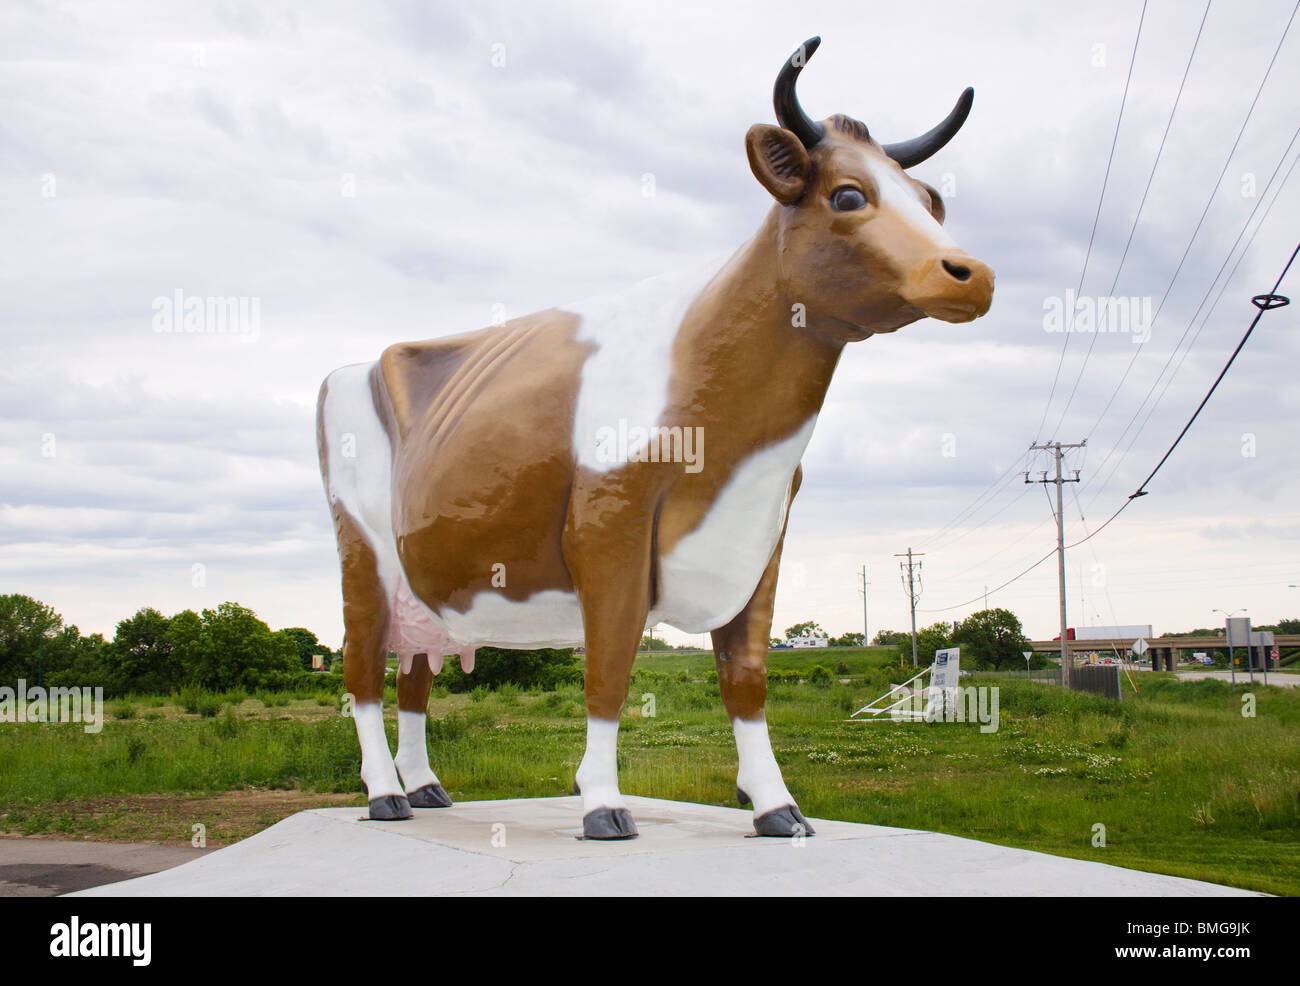 Giant Cow statue in Janesville Wisconsin Stock Photo